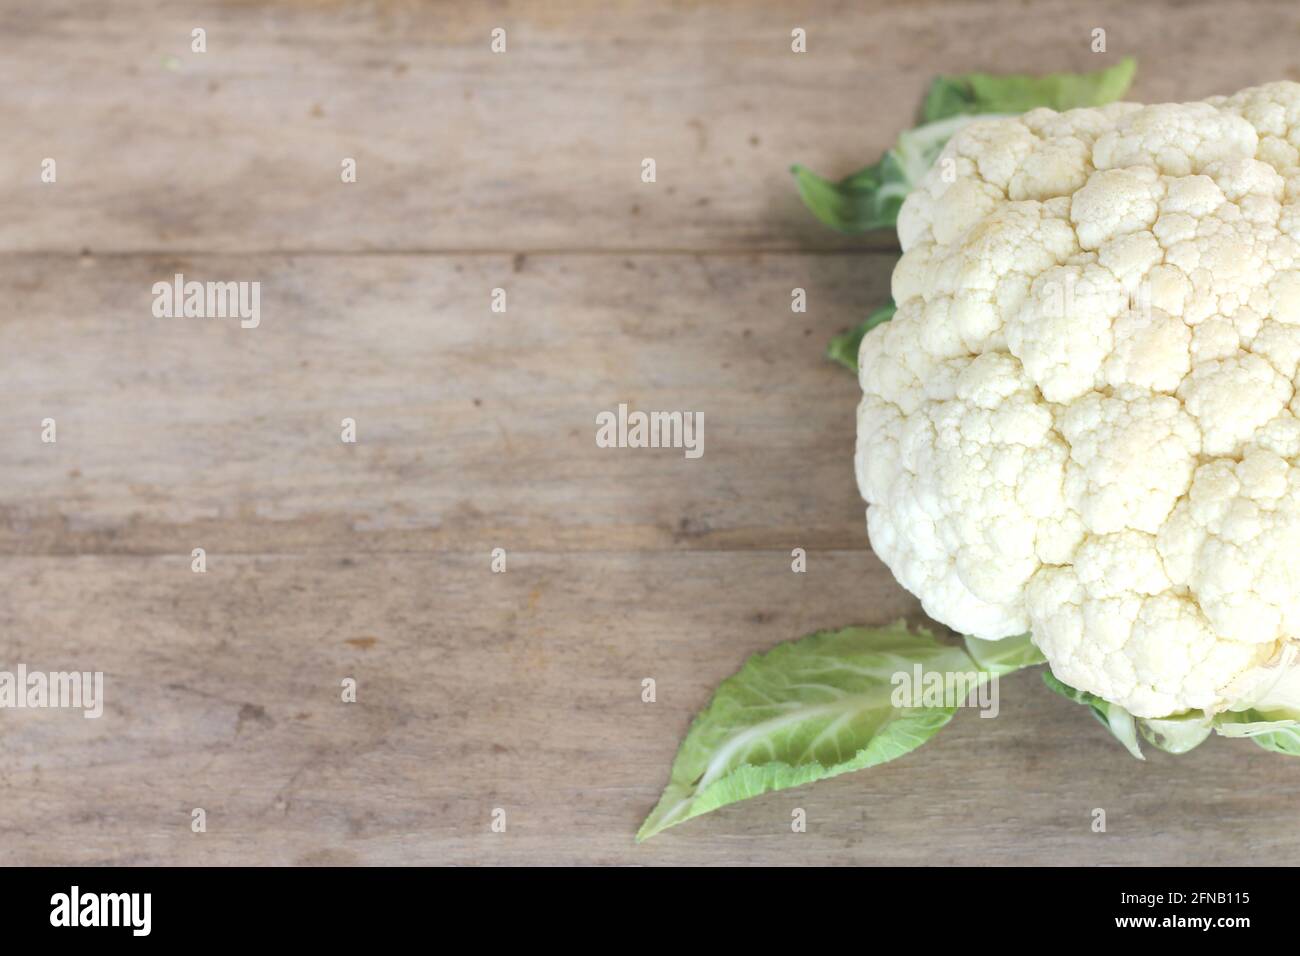 White cauliflower was placed on a wooden floor, leaving space for text messages. Stock Photo